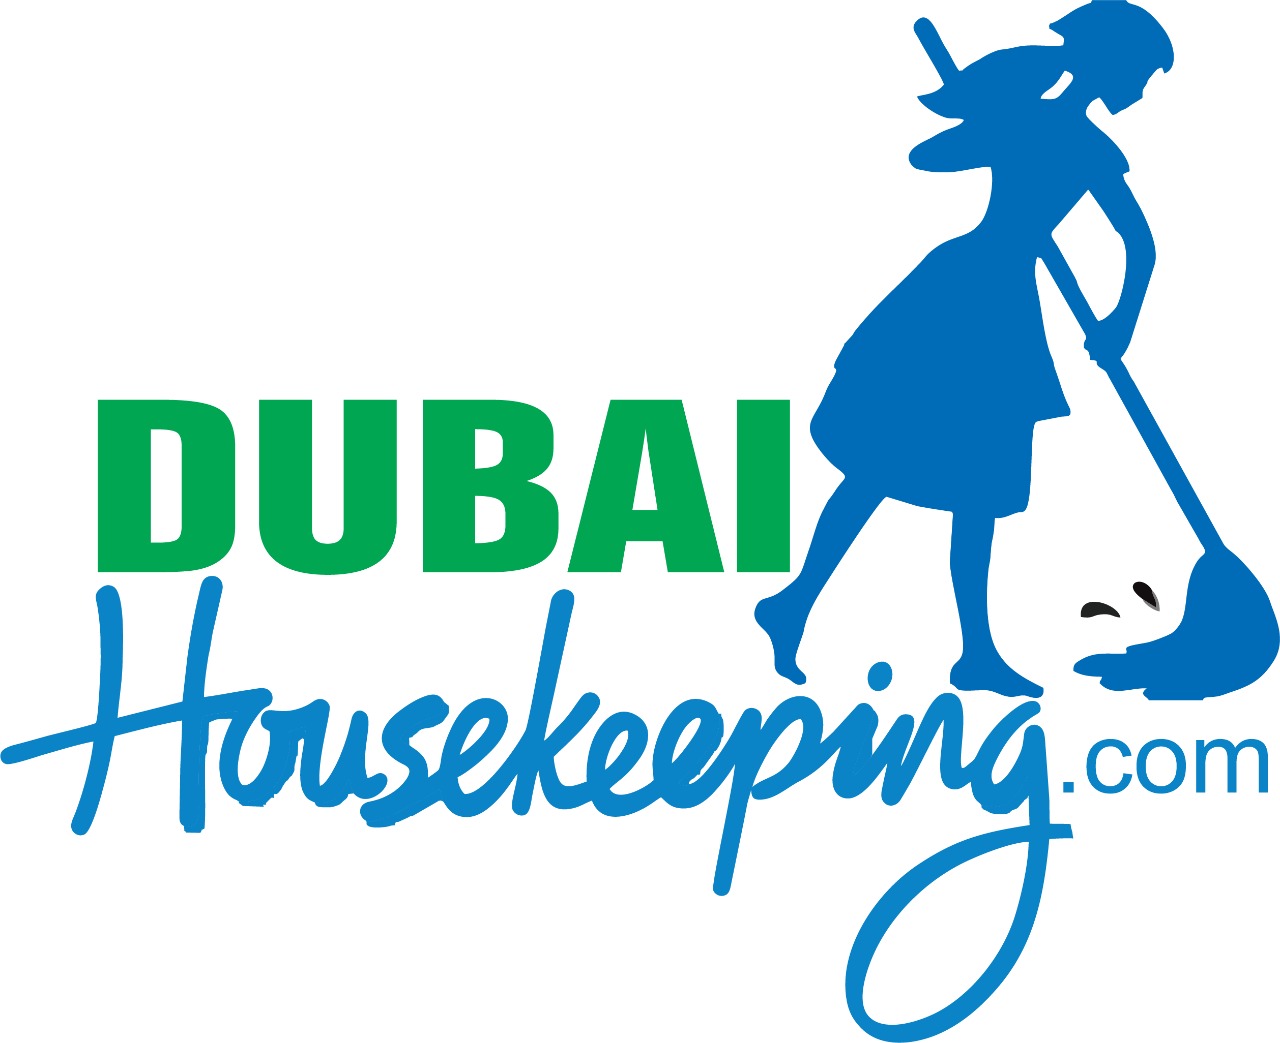 The professional upholstery sofa cleaning services in Dubai